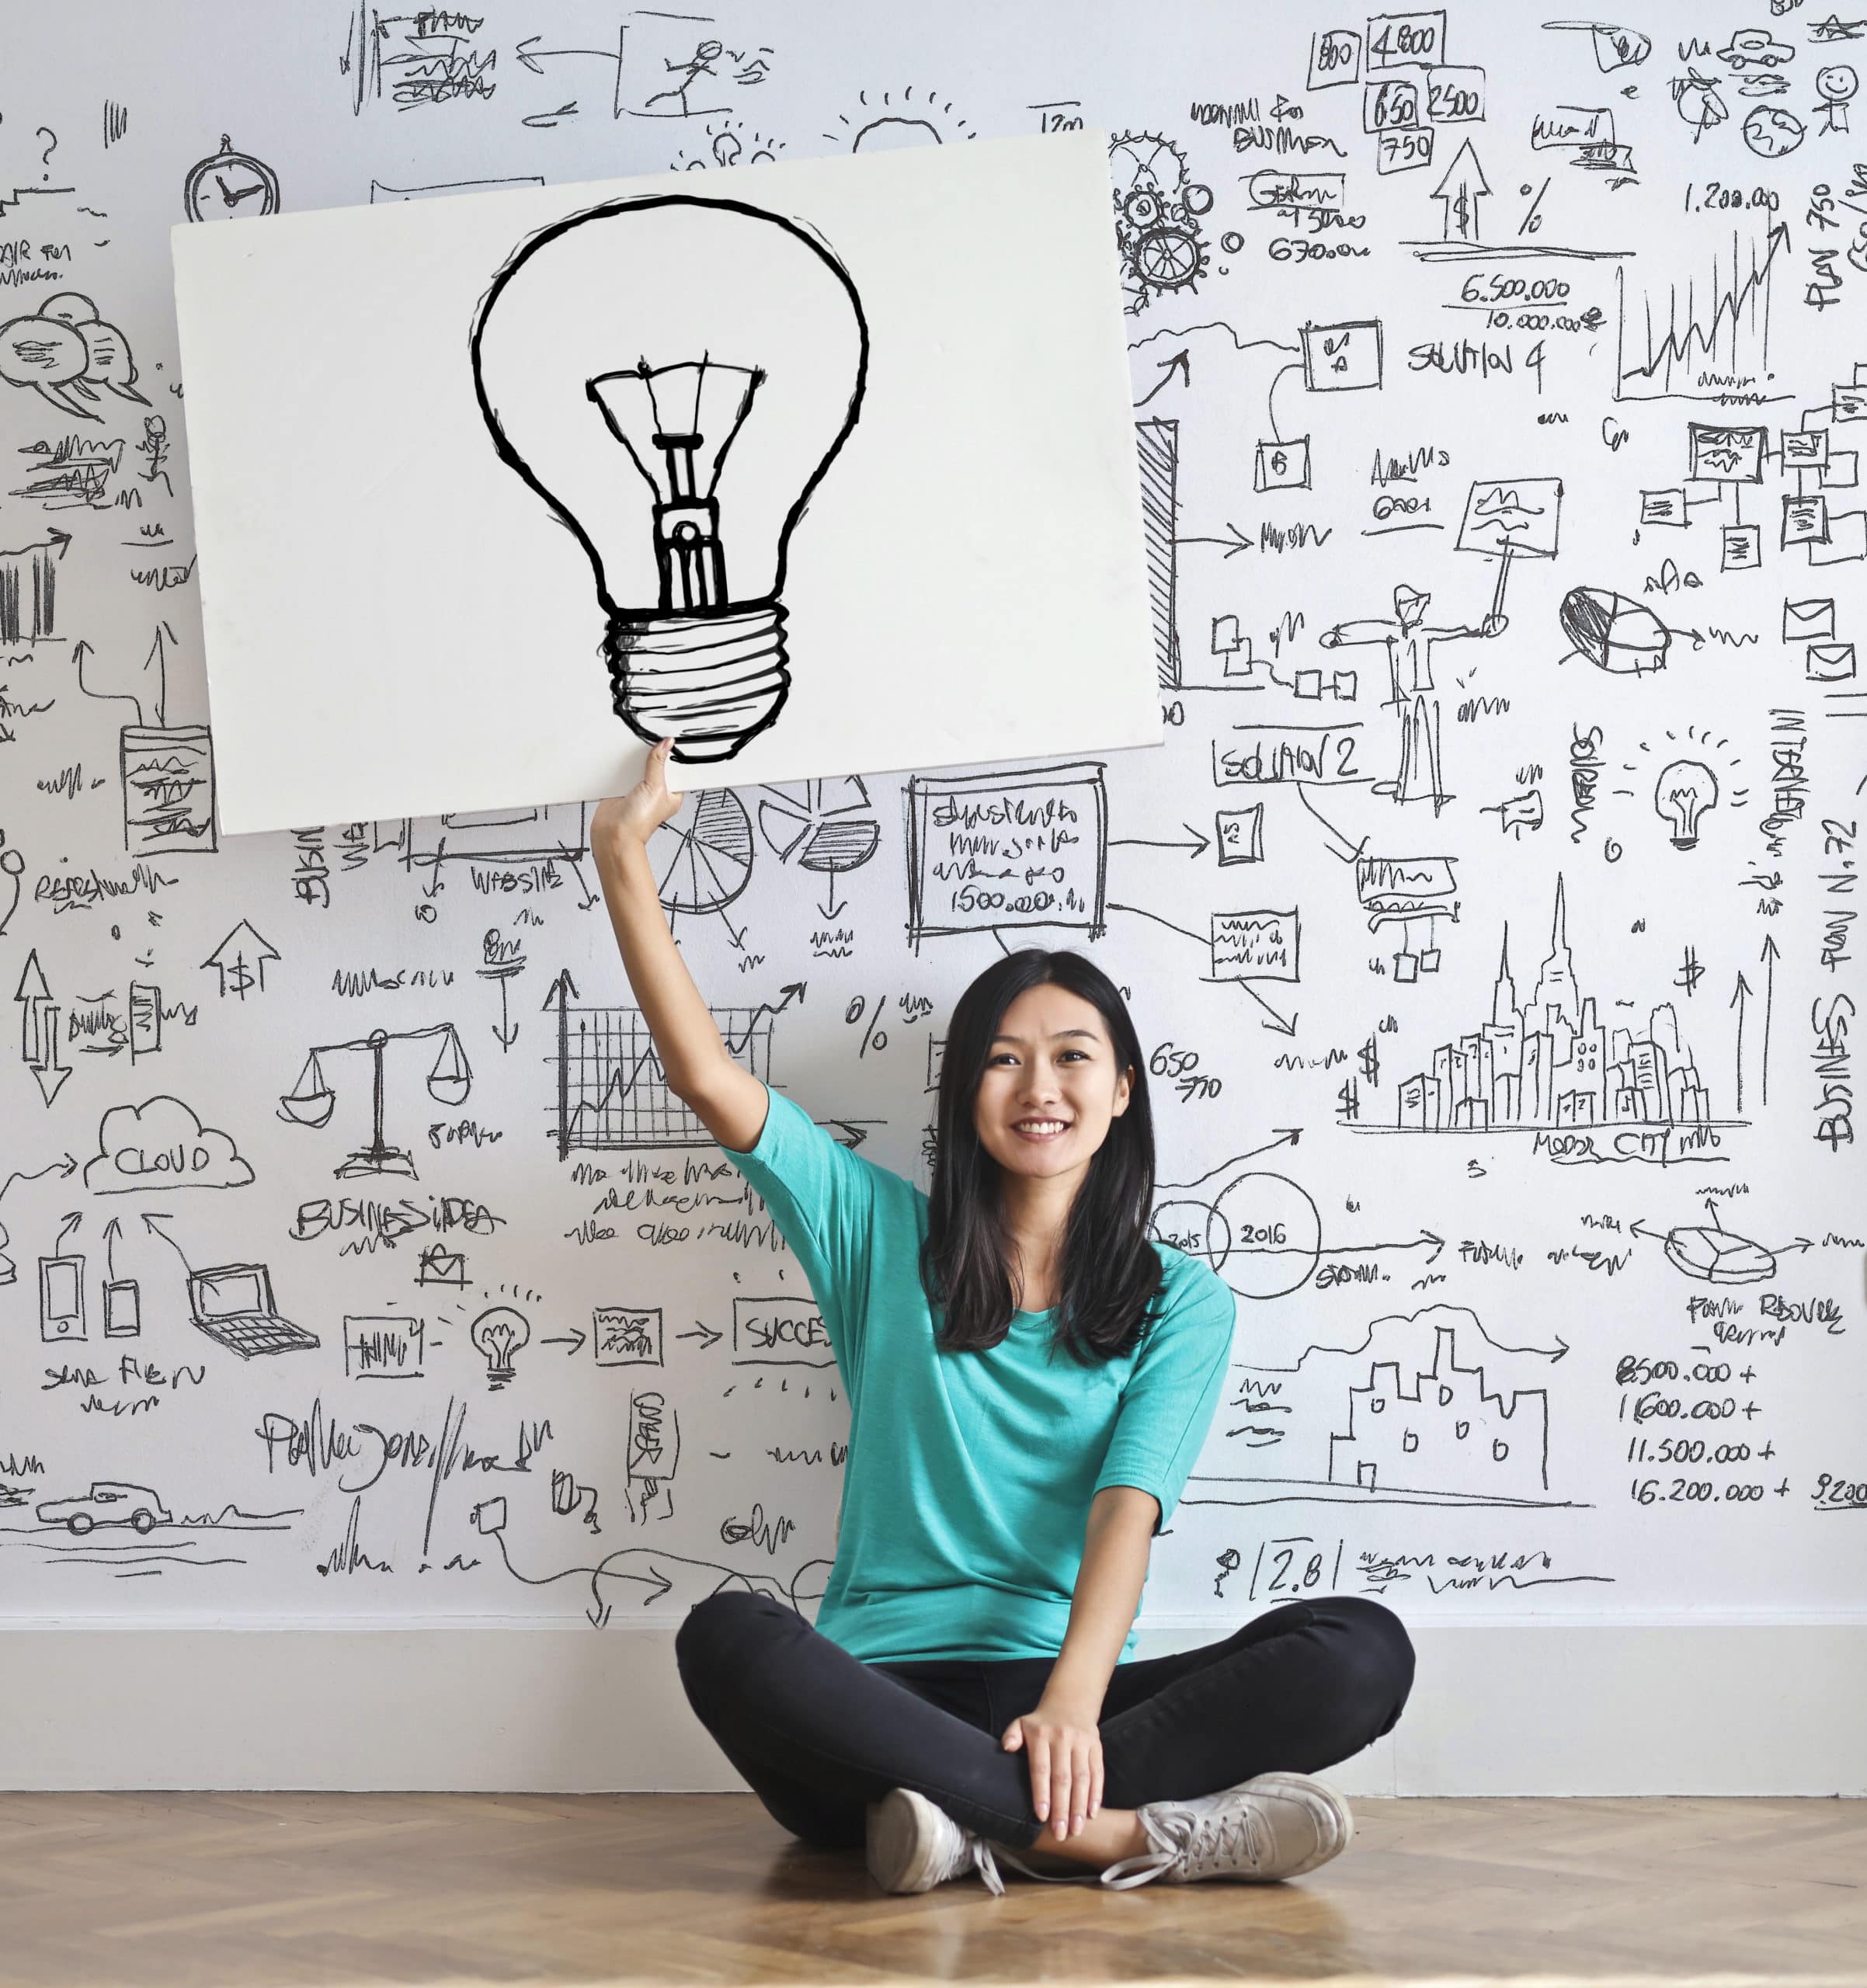 Woman thinking of an idea and holding a poster of a light bulb to signify innovation